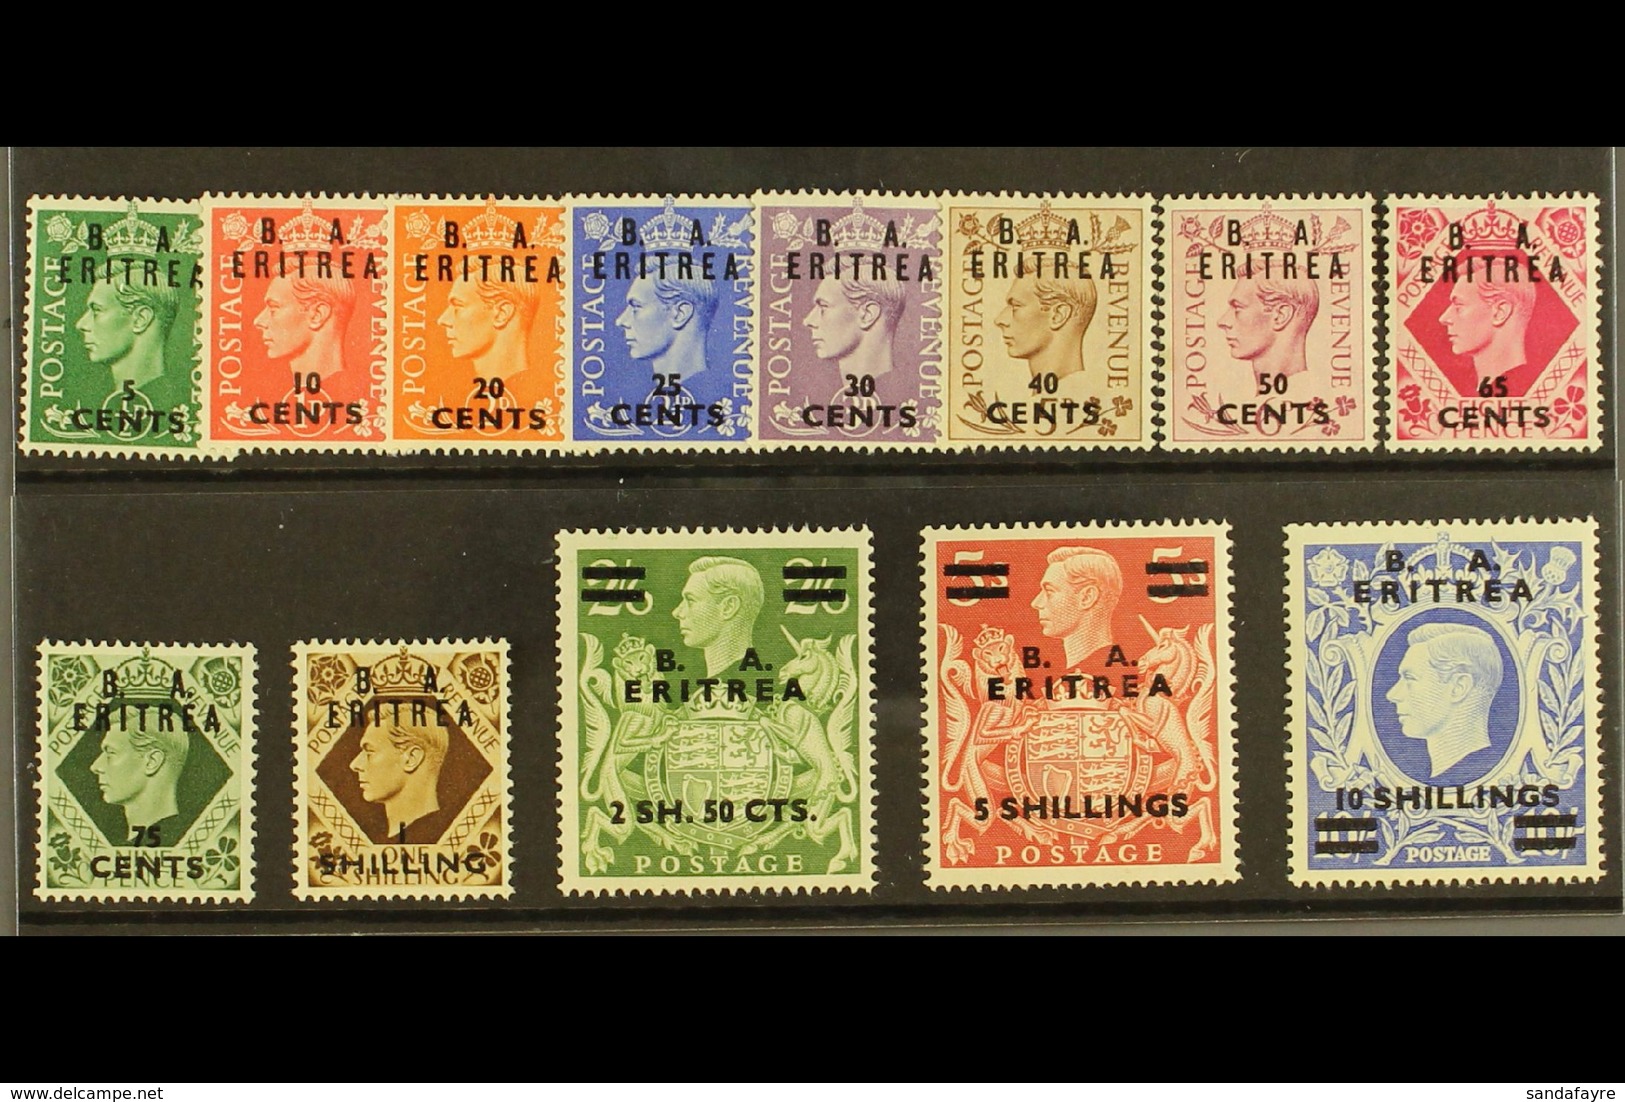 ERITREA  1950 "B. A. ERITREA" Complete Set, SG E13/25, Very Fine Mint, Most (including Top Three Values) Never Hinged. ( - Italiaans Oost-Afrika